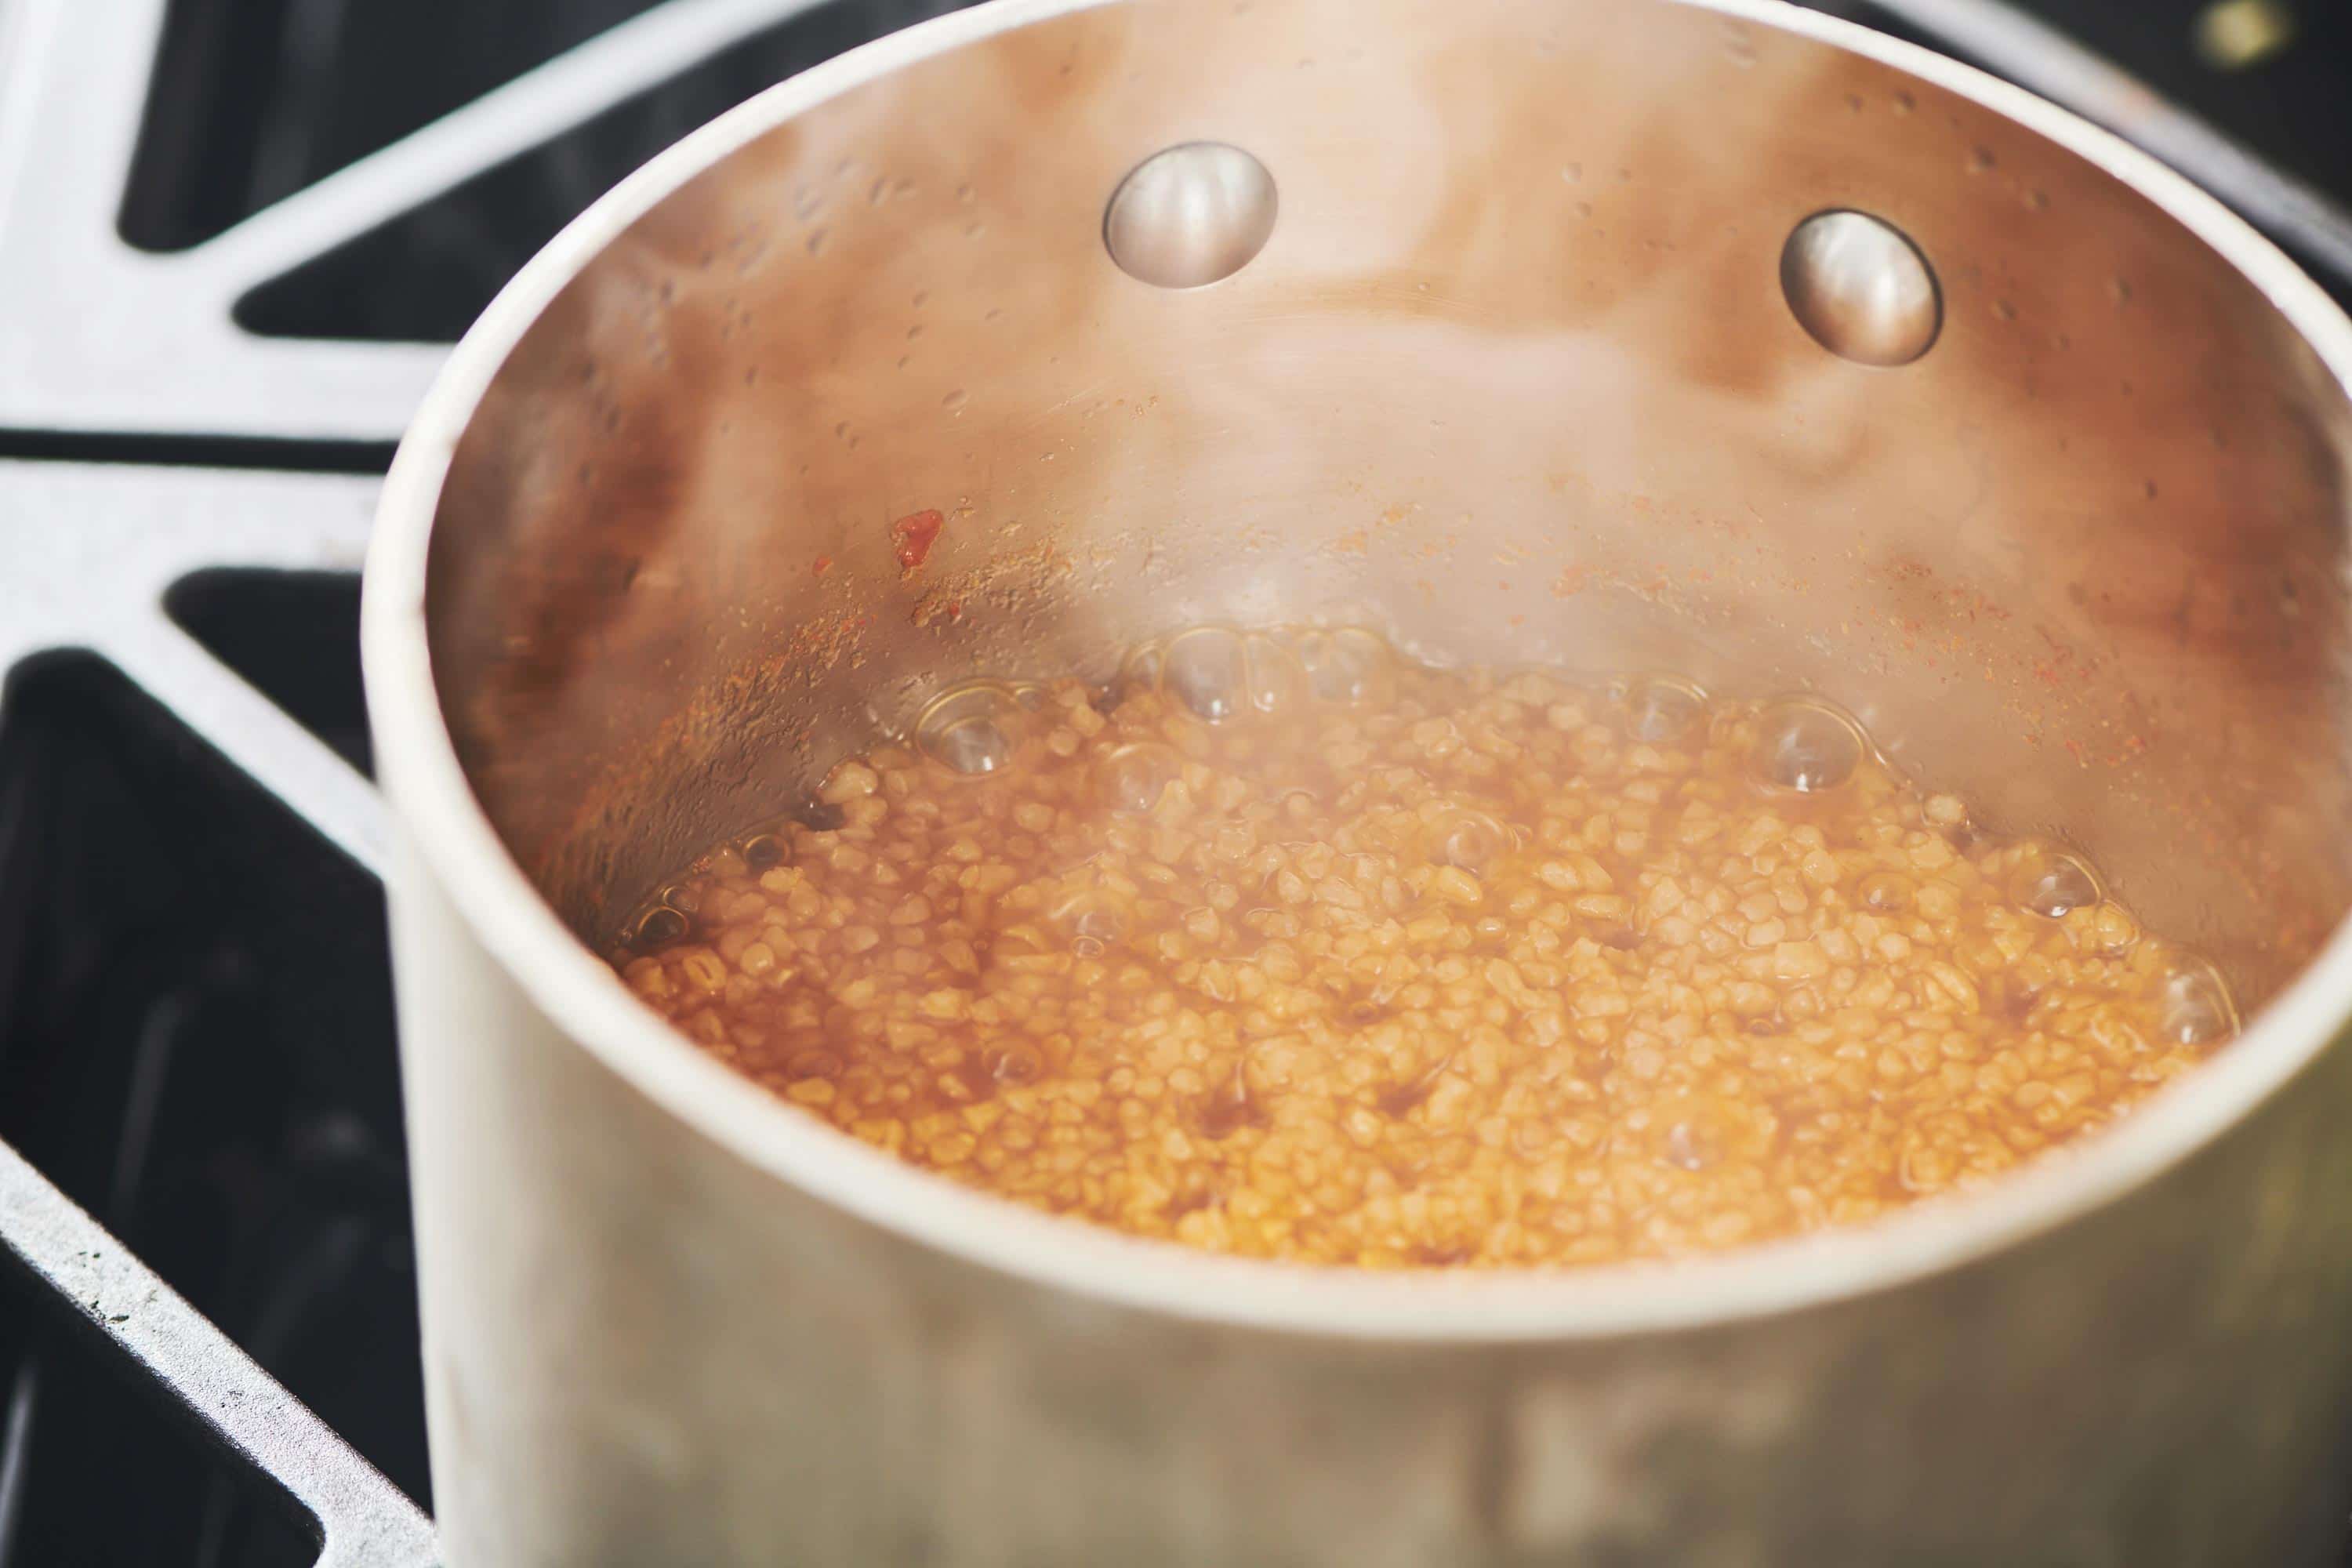 Bulgur wheat simmering in a pot on the stove.